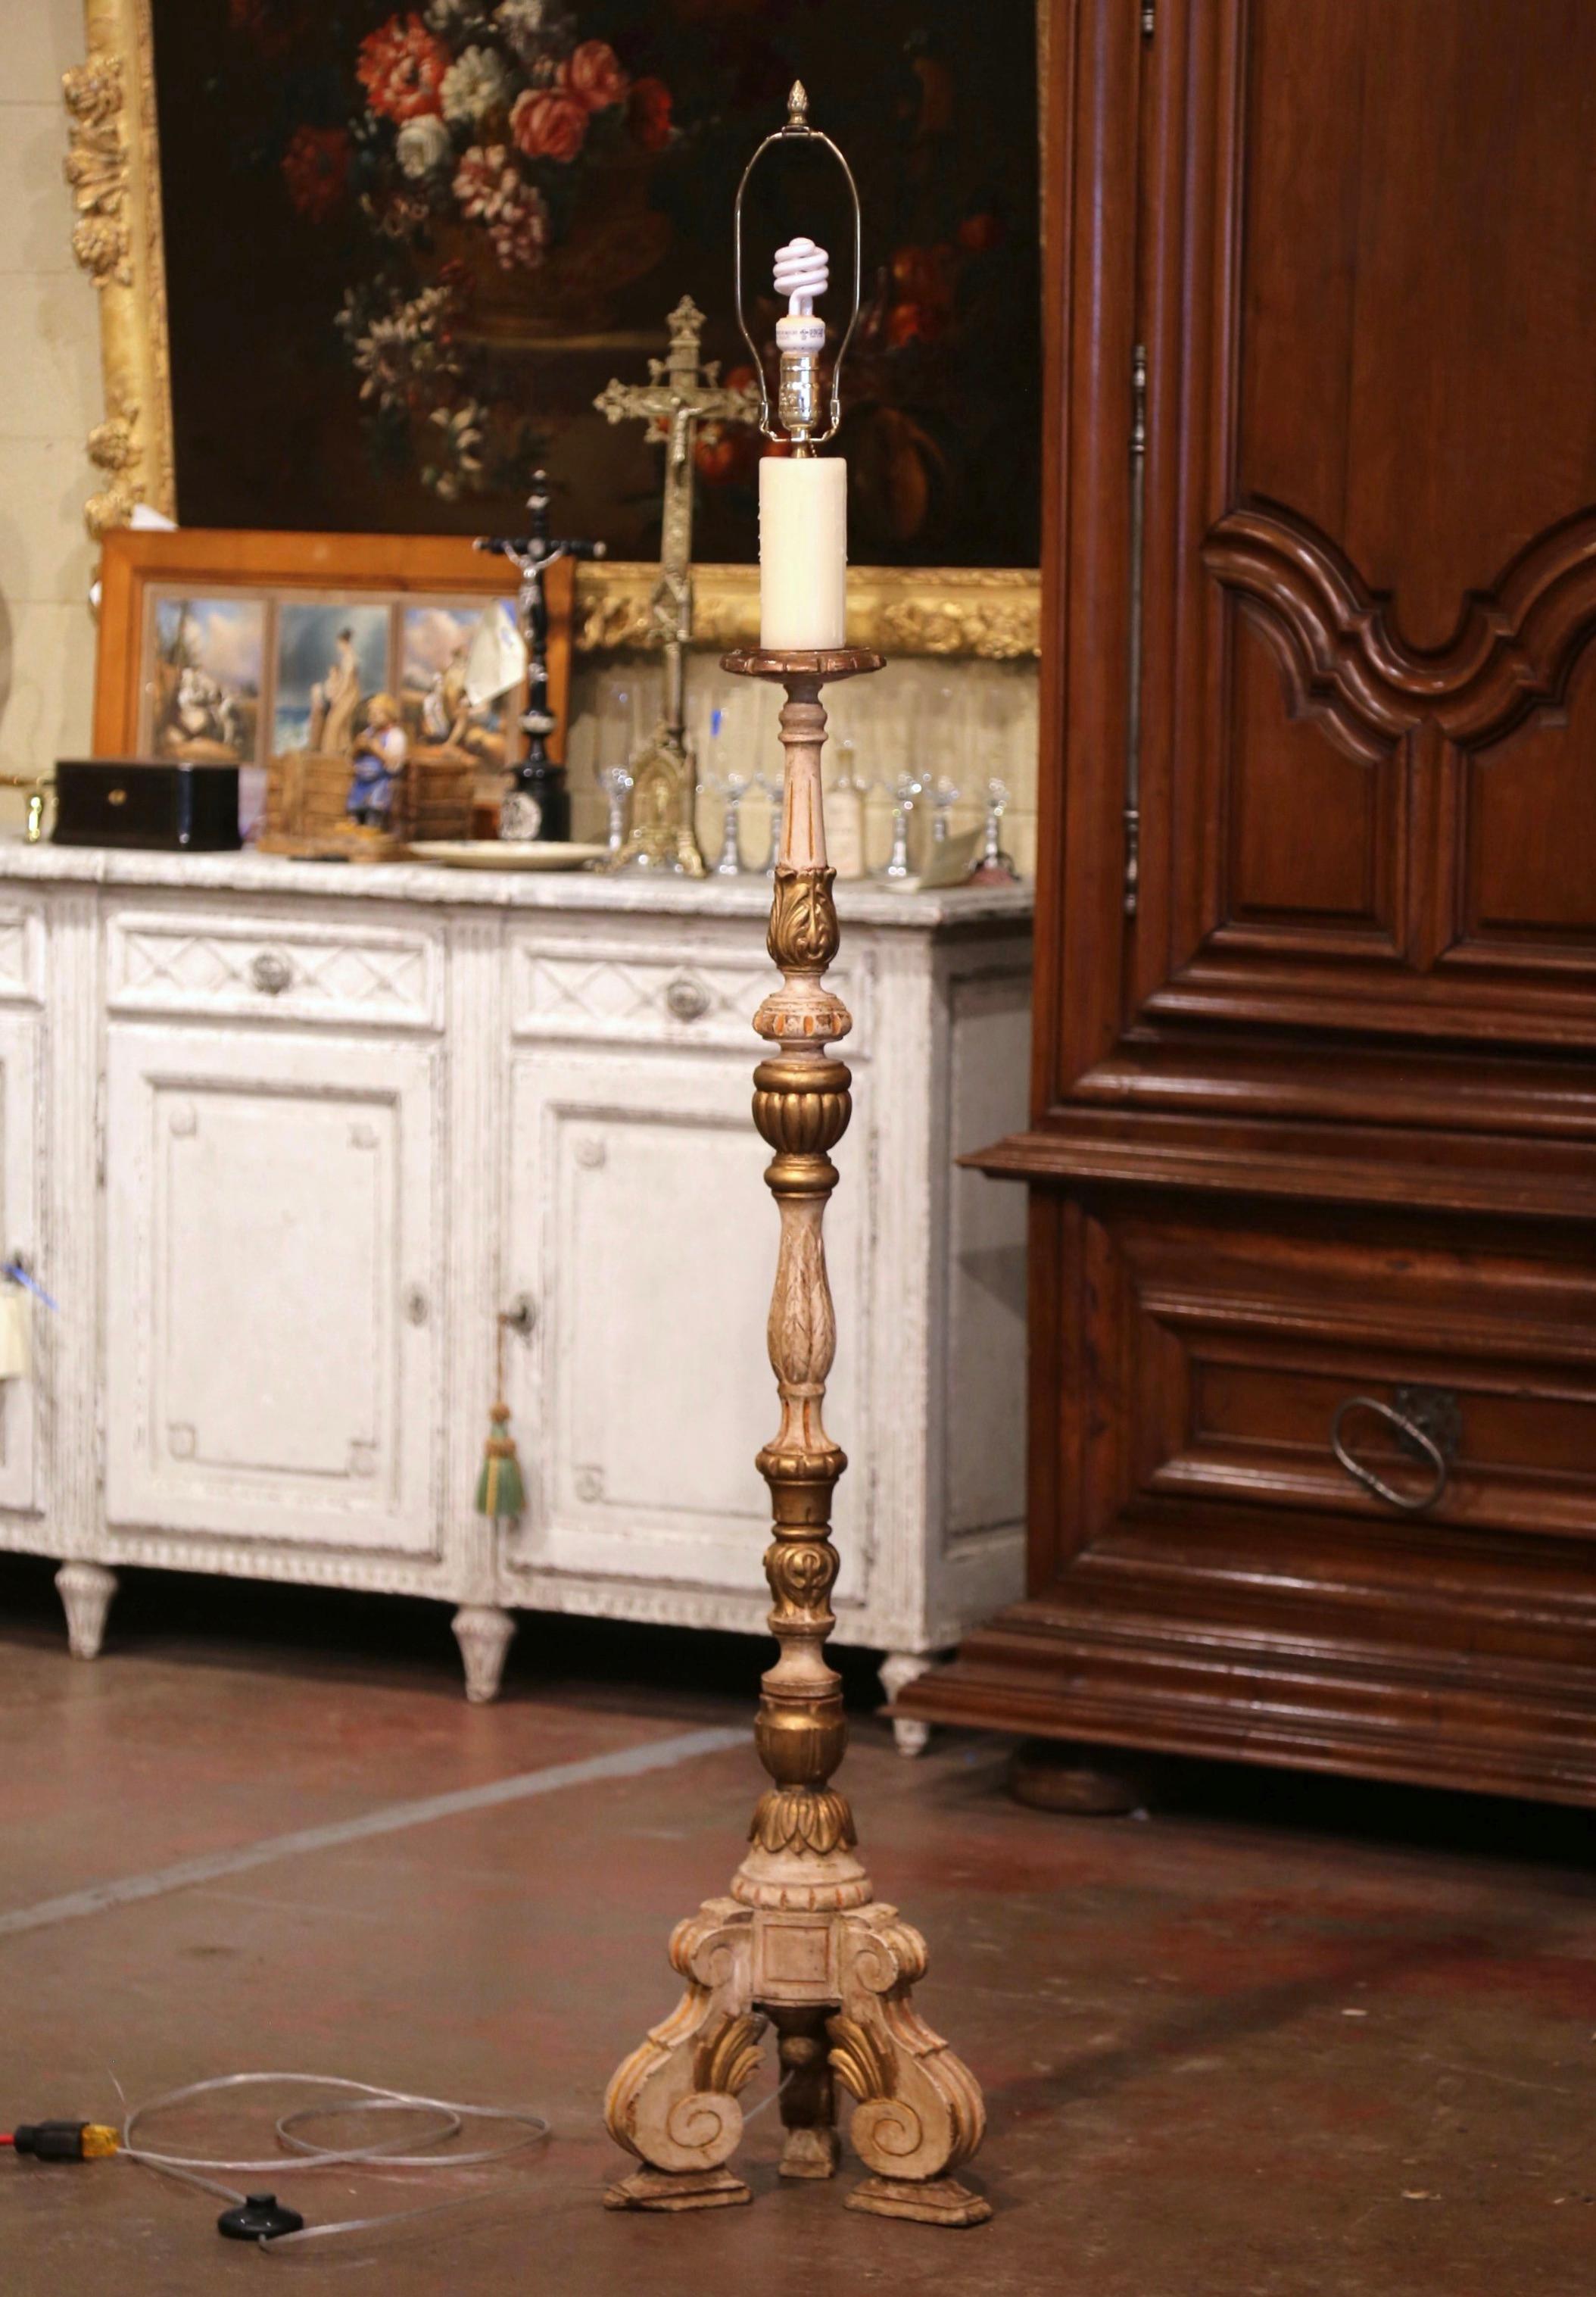 This tall antique wood floor lamp was carved in Italy, circa 1890. The elegant light stands a scrolled tripartite pedestal base ending with scrolled feet. The fluted stem is decorated with acanthus leaf motifs and embellished at the top with a